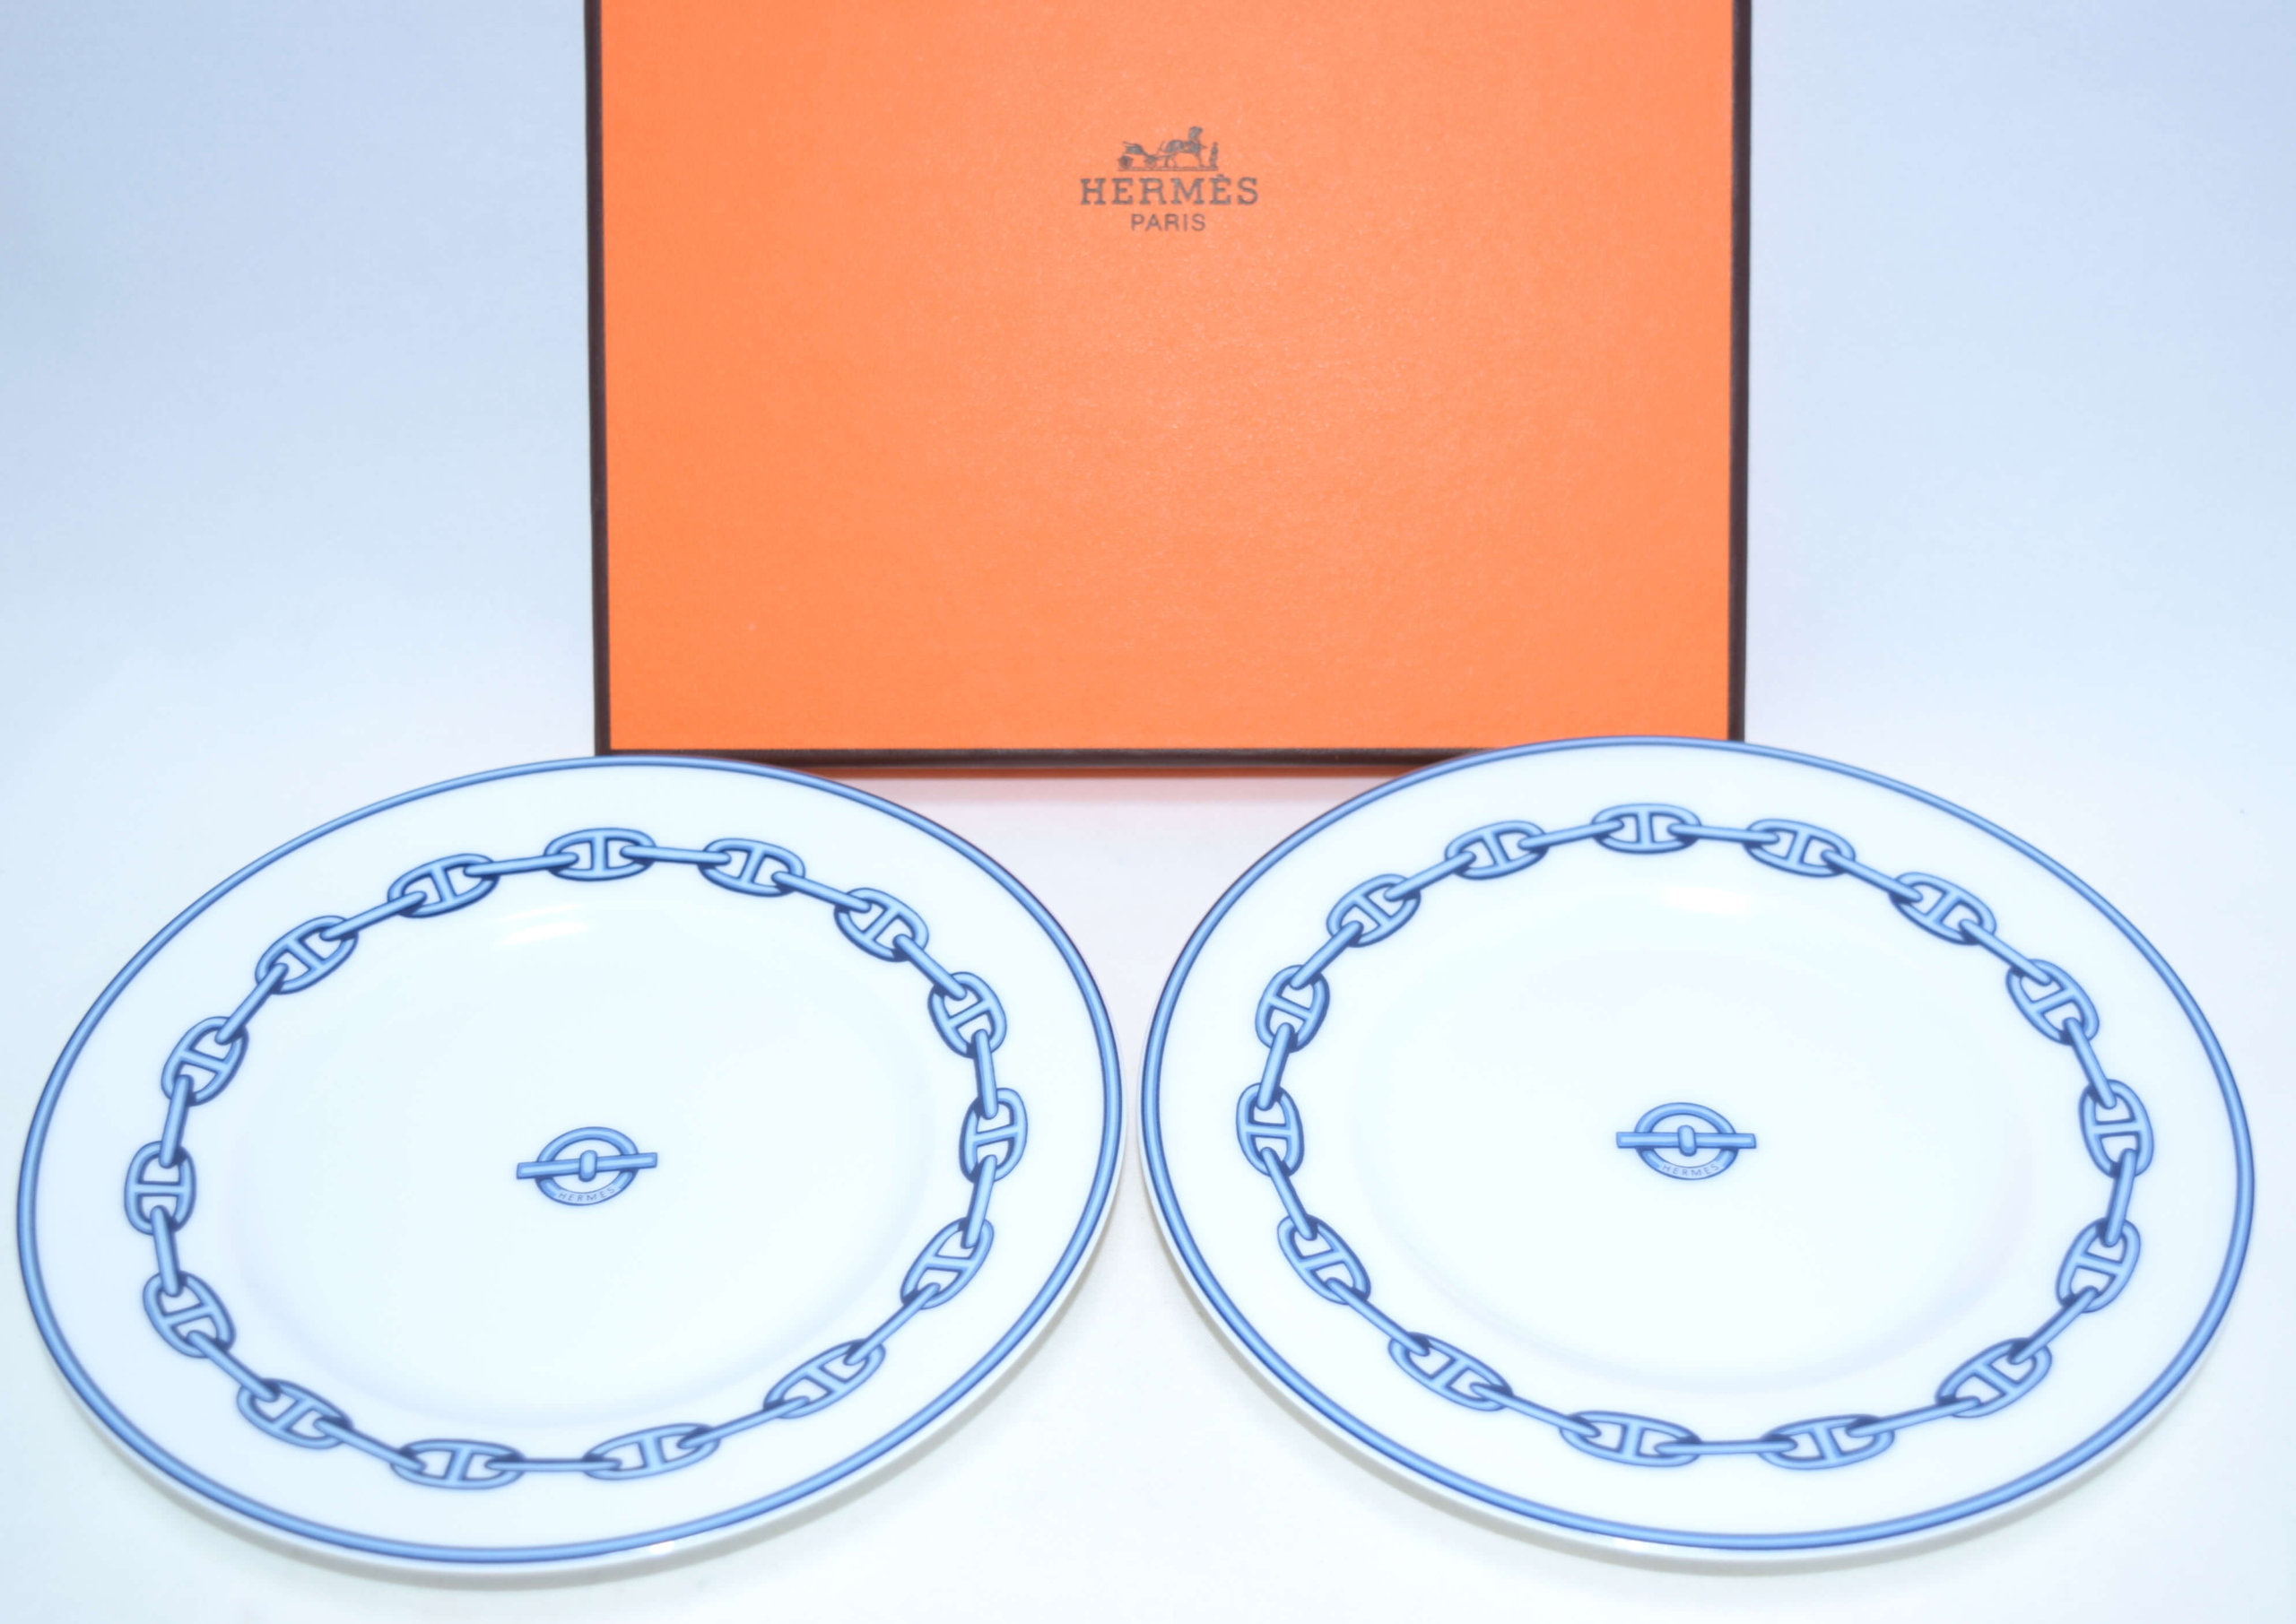 VINTAGE HERMES PARIS CHAIN D'ANCRE TRINKET TRAY WITH BOX